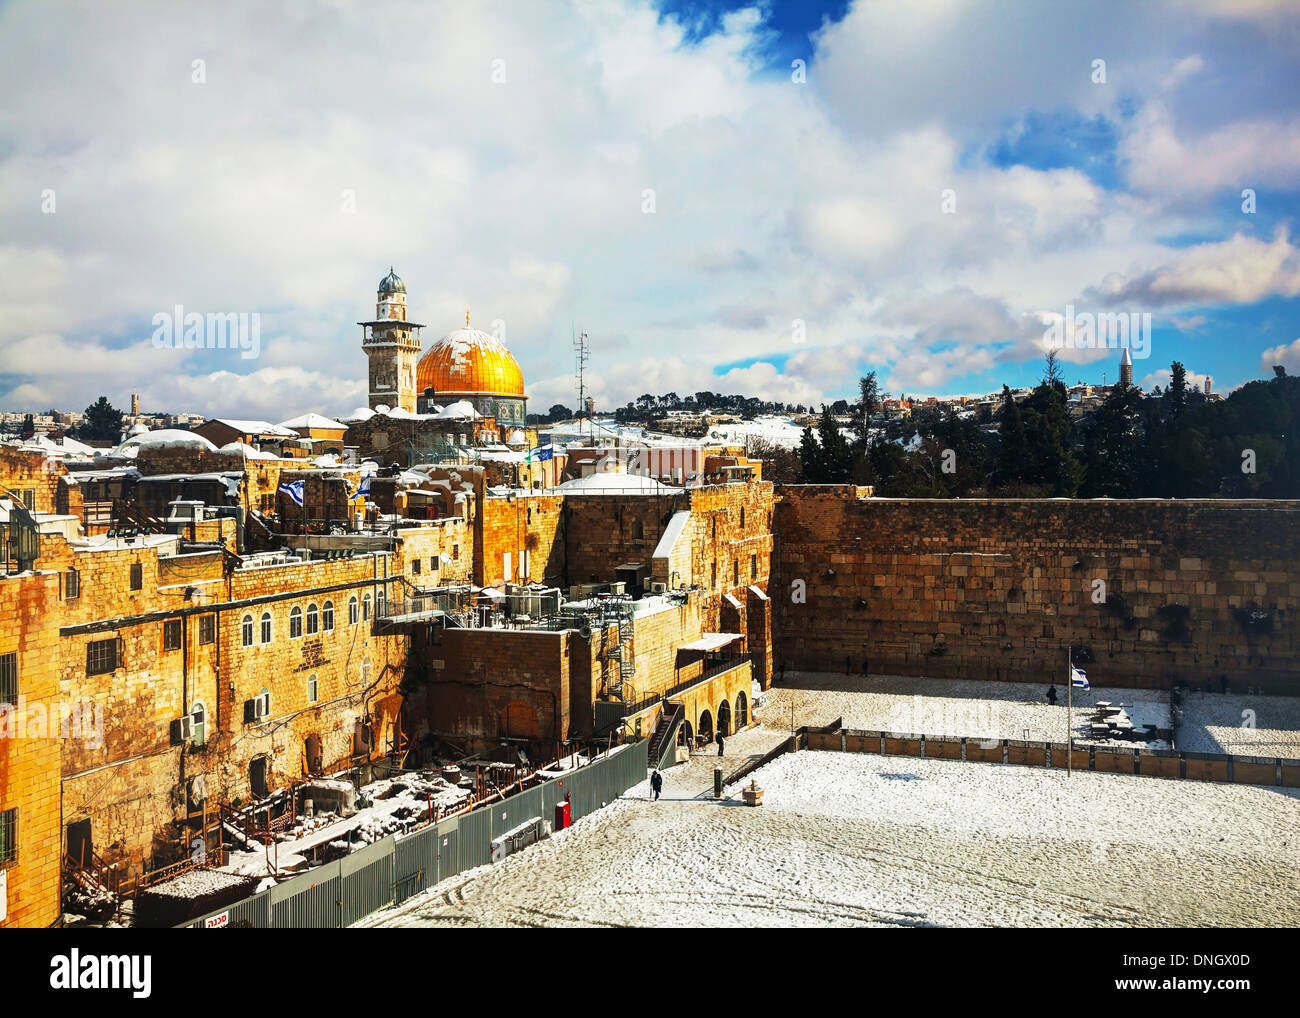 The Western Wall in Jerusalem, Israel om a sunny day Stock Photo